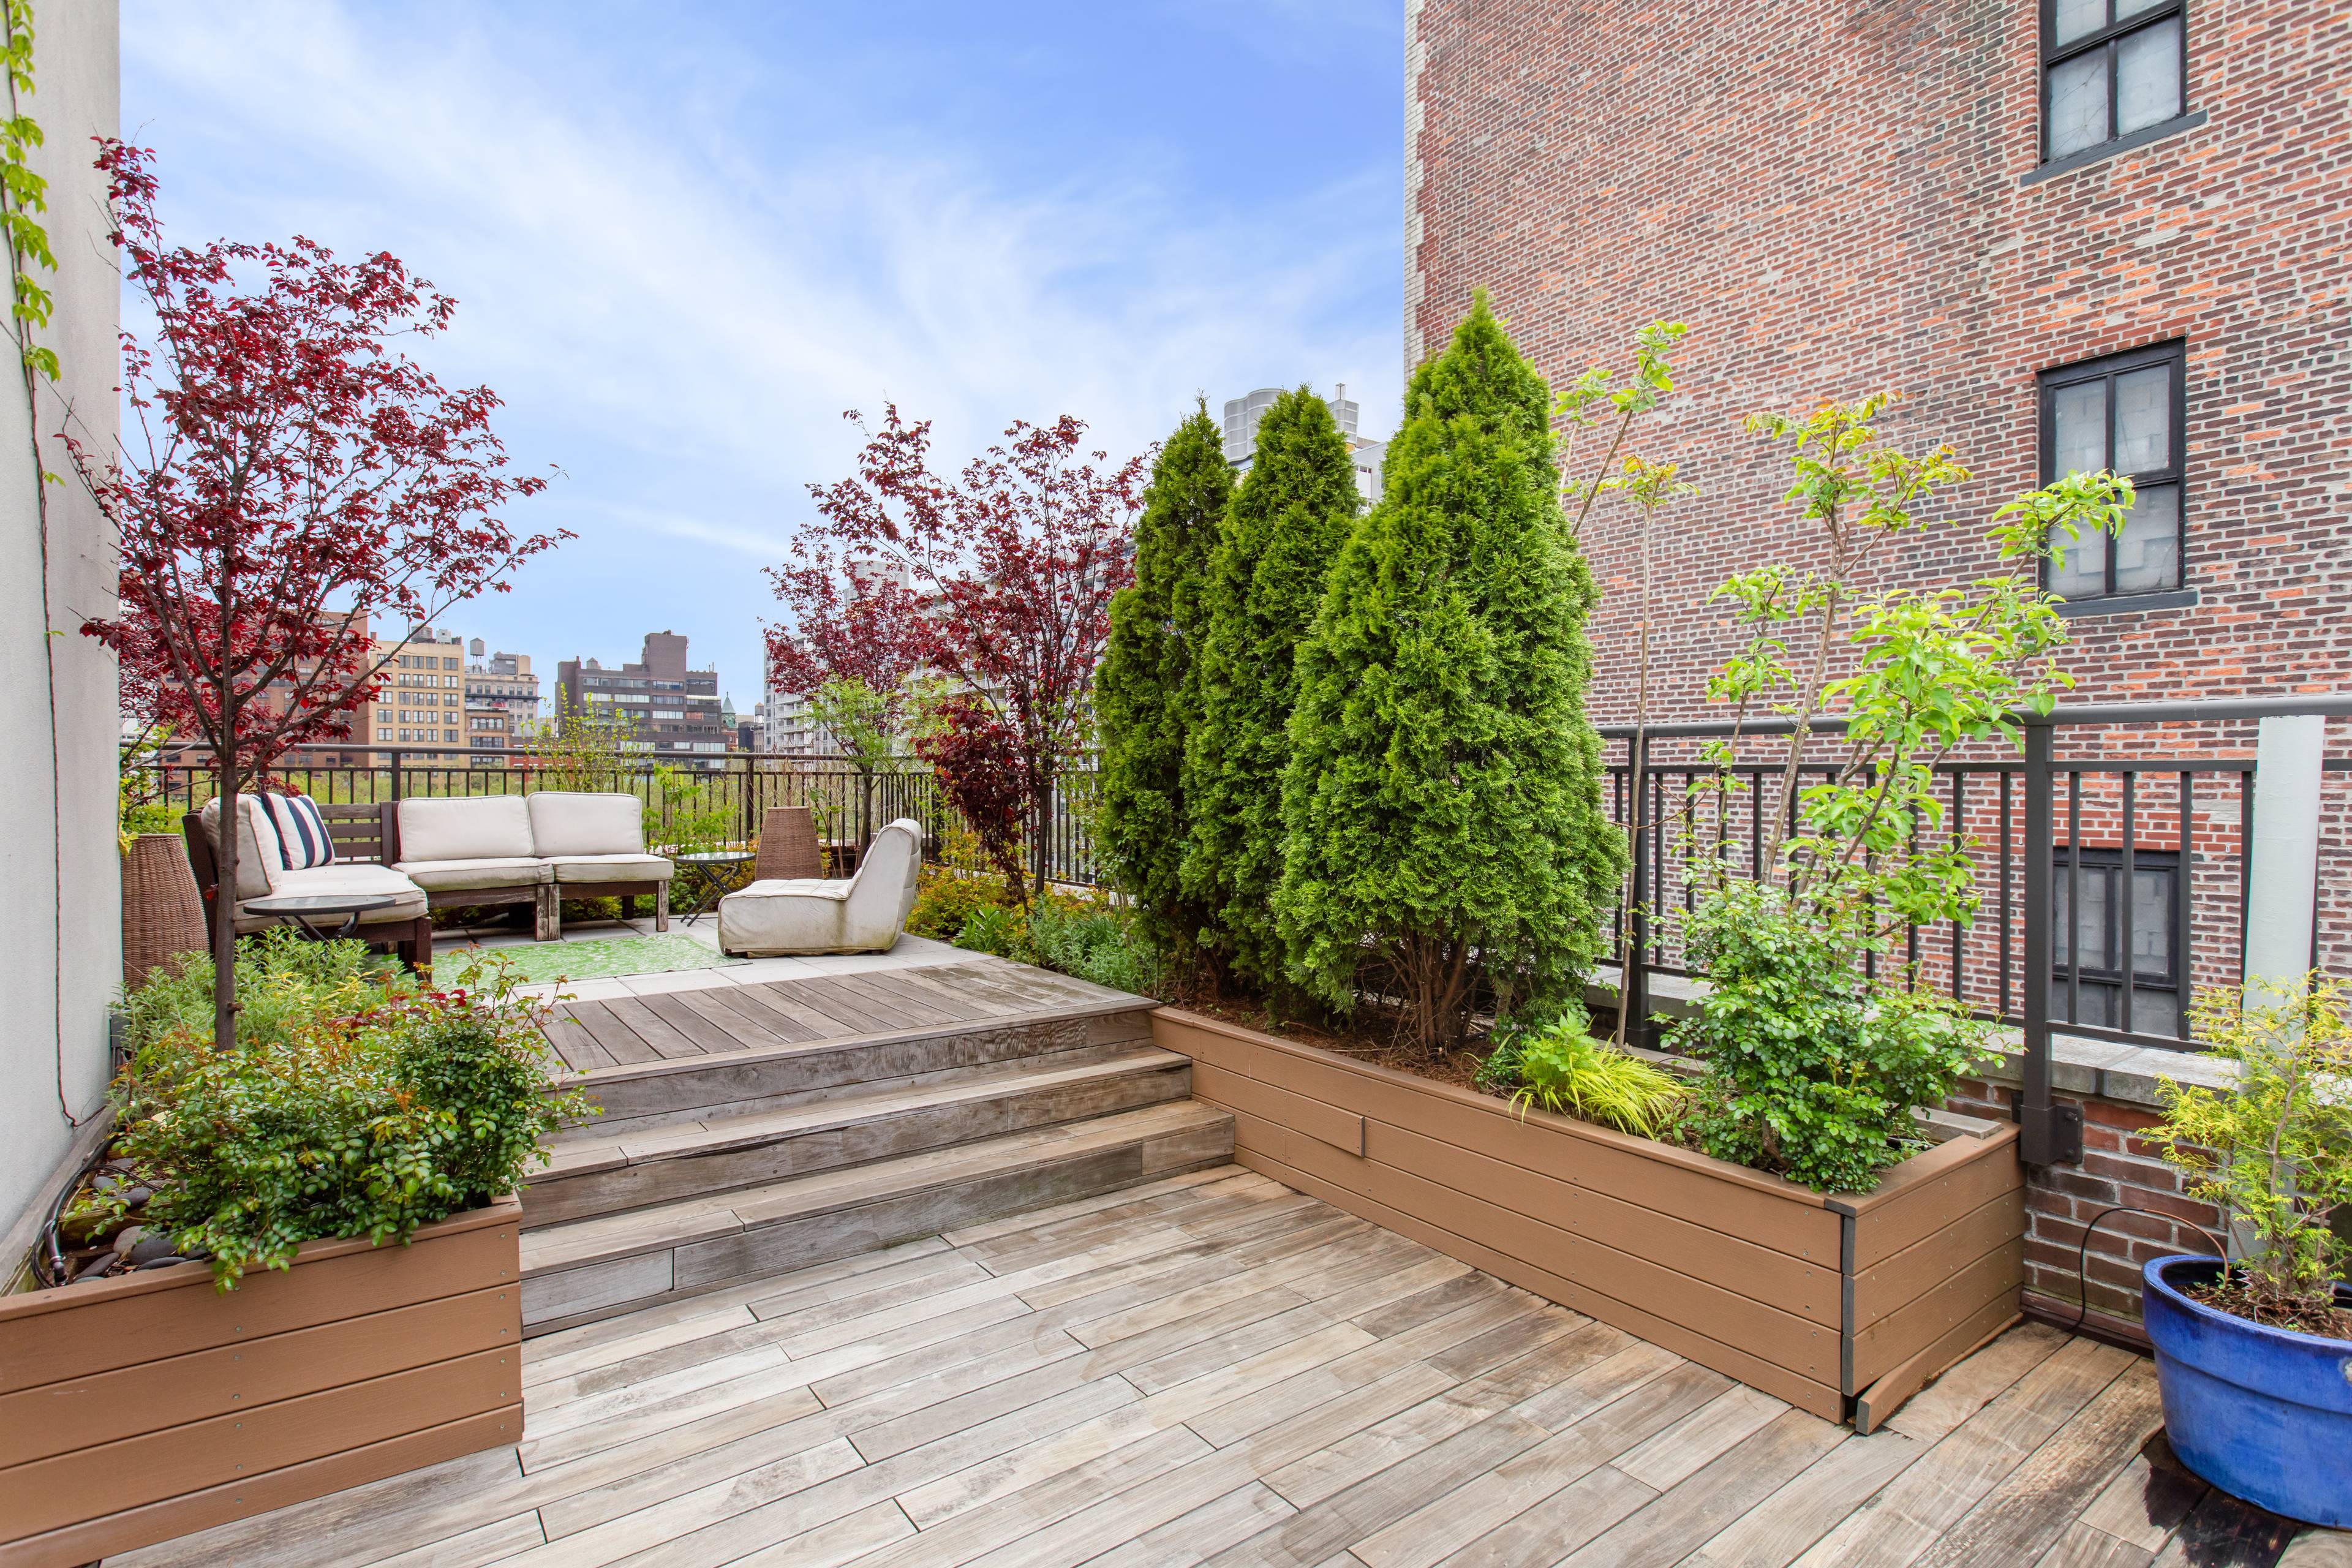 An exceptional private roof deck, with new decking, plantings, and irrigation system, is the crowning achievement of this rare 2 bedroom, 2.